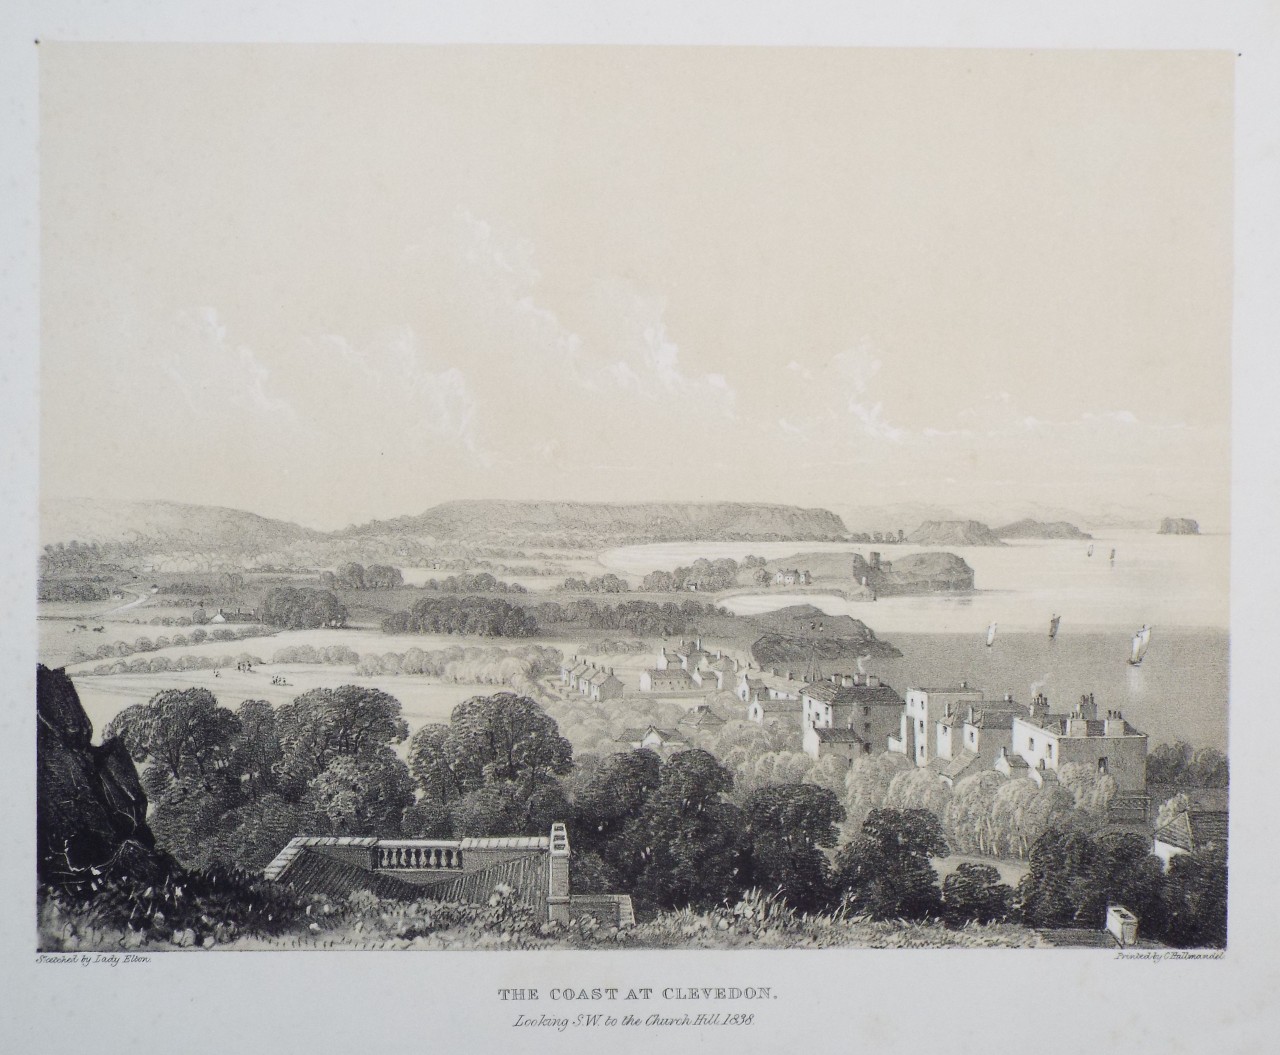 Lithograph - The Coast at Clevedon. Looking S W to the Church Hill 1838.